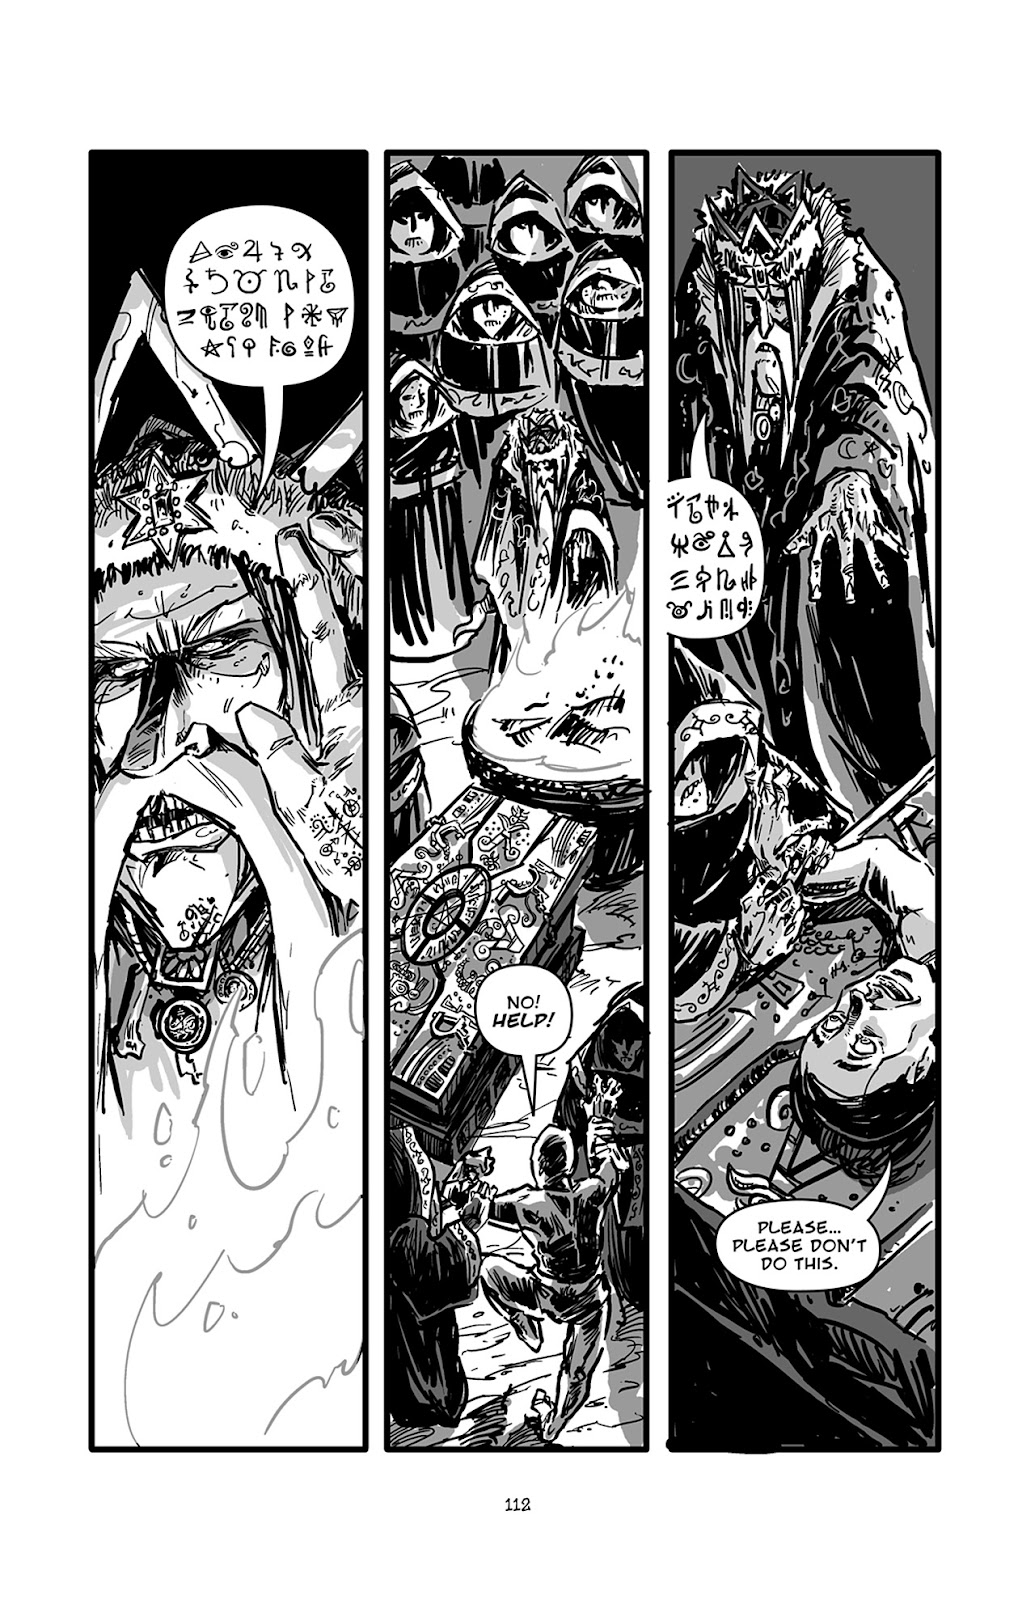 Pinocchio: Vampire Slayer - Of Wood and Blood issue 5 - Page 13